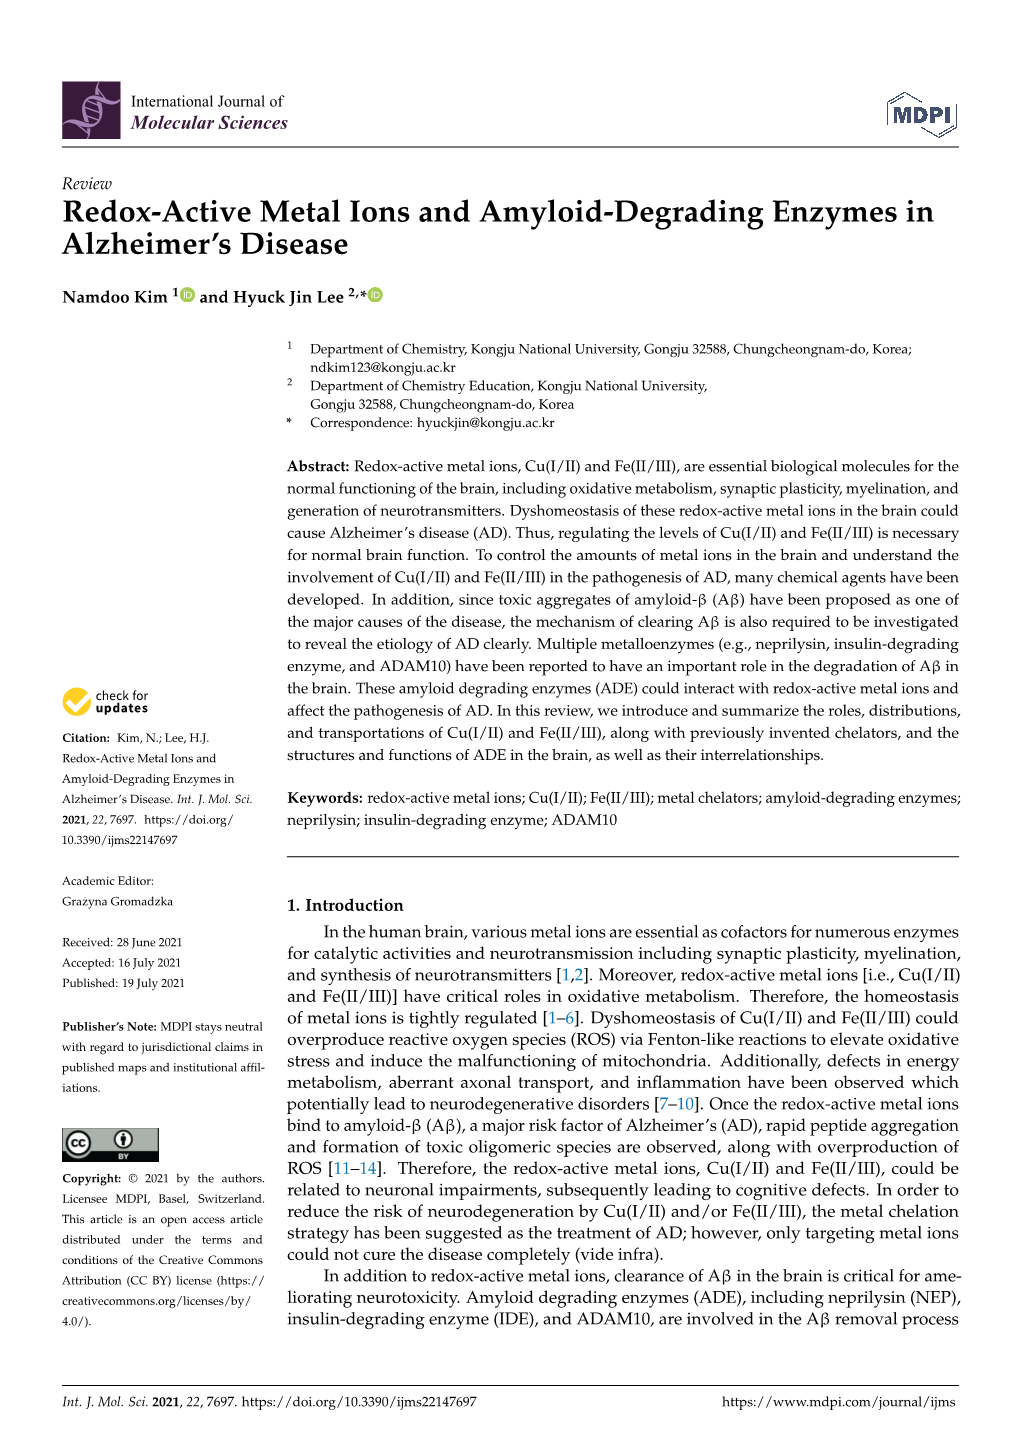 Redox-Active Metal Ions and Amyloid-Degrading Enzymes in Alzheimer’S Disease